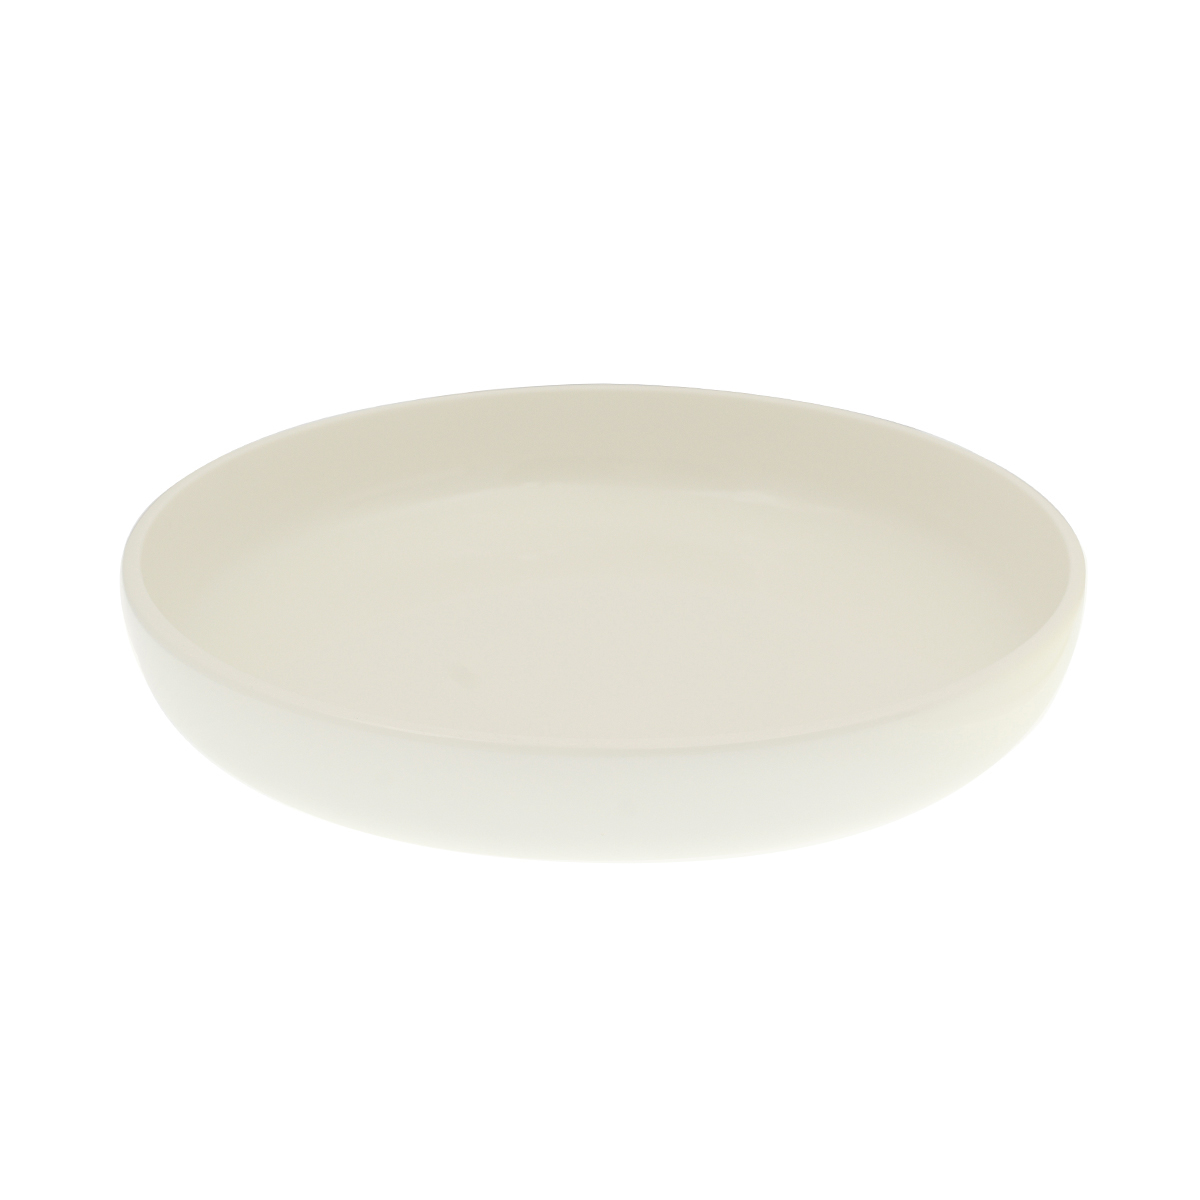 EASE IVORY ROUND DEEP PLATES